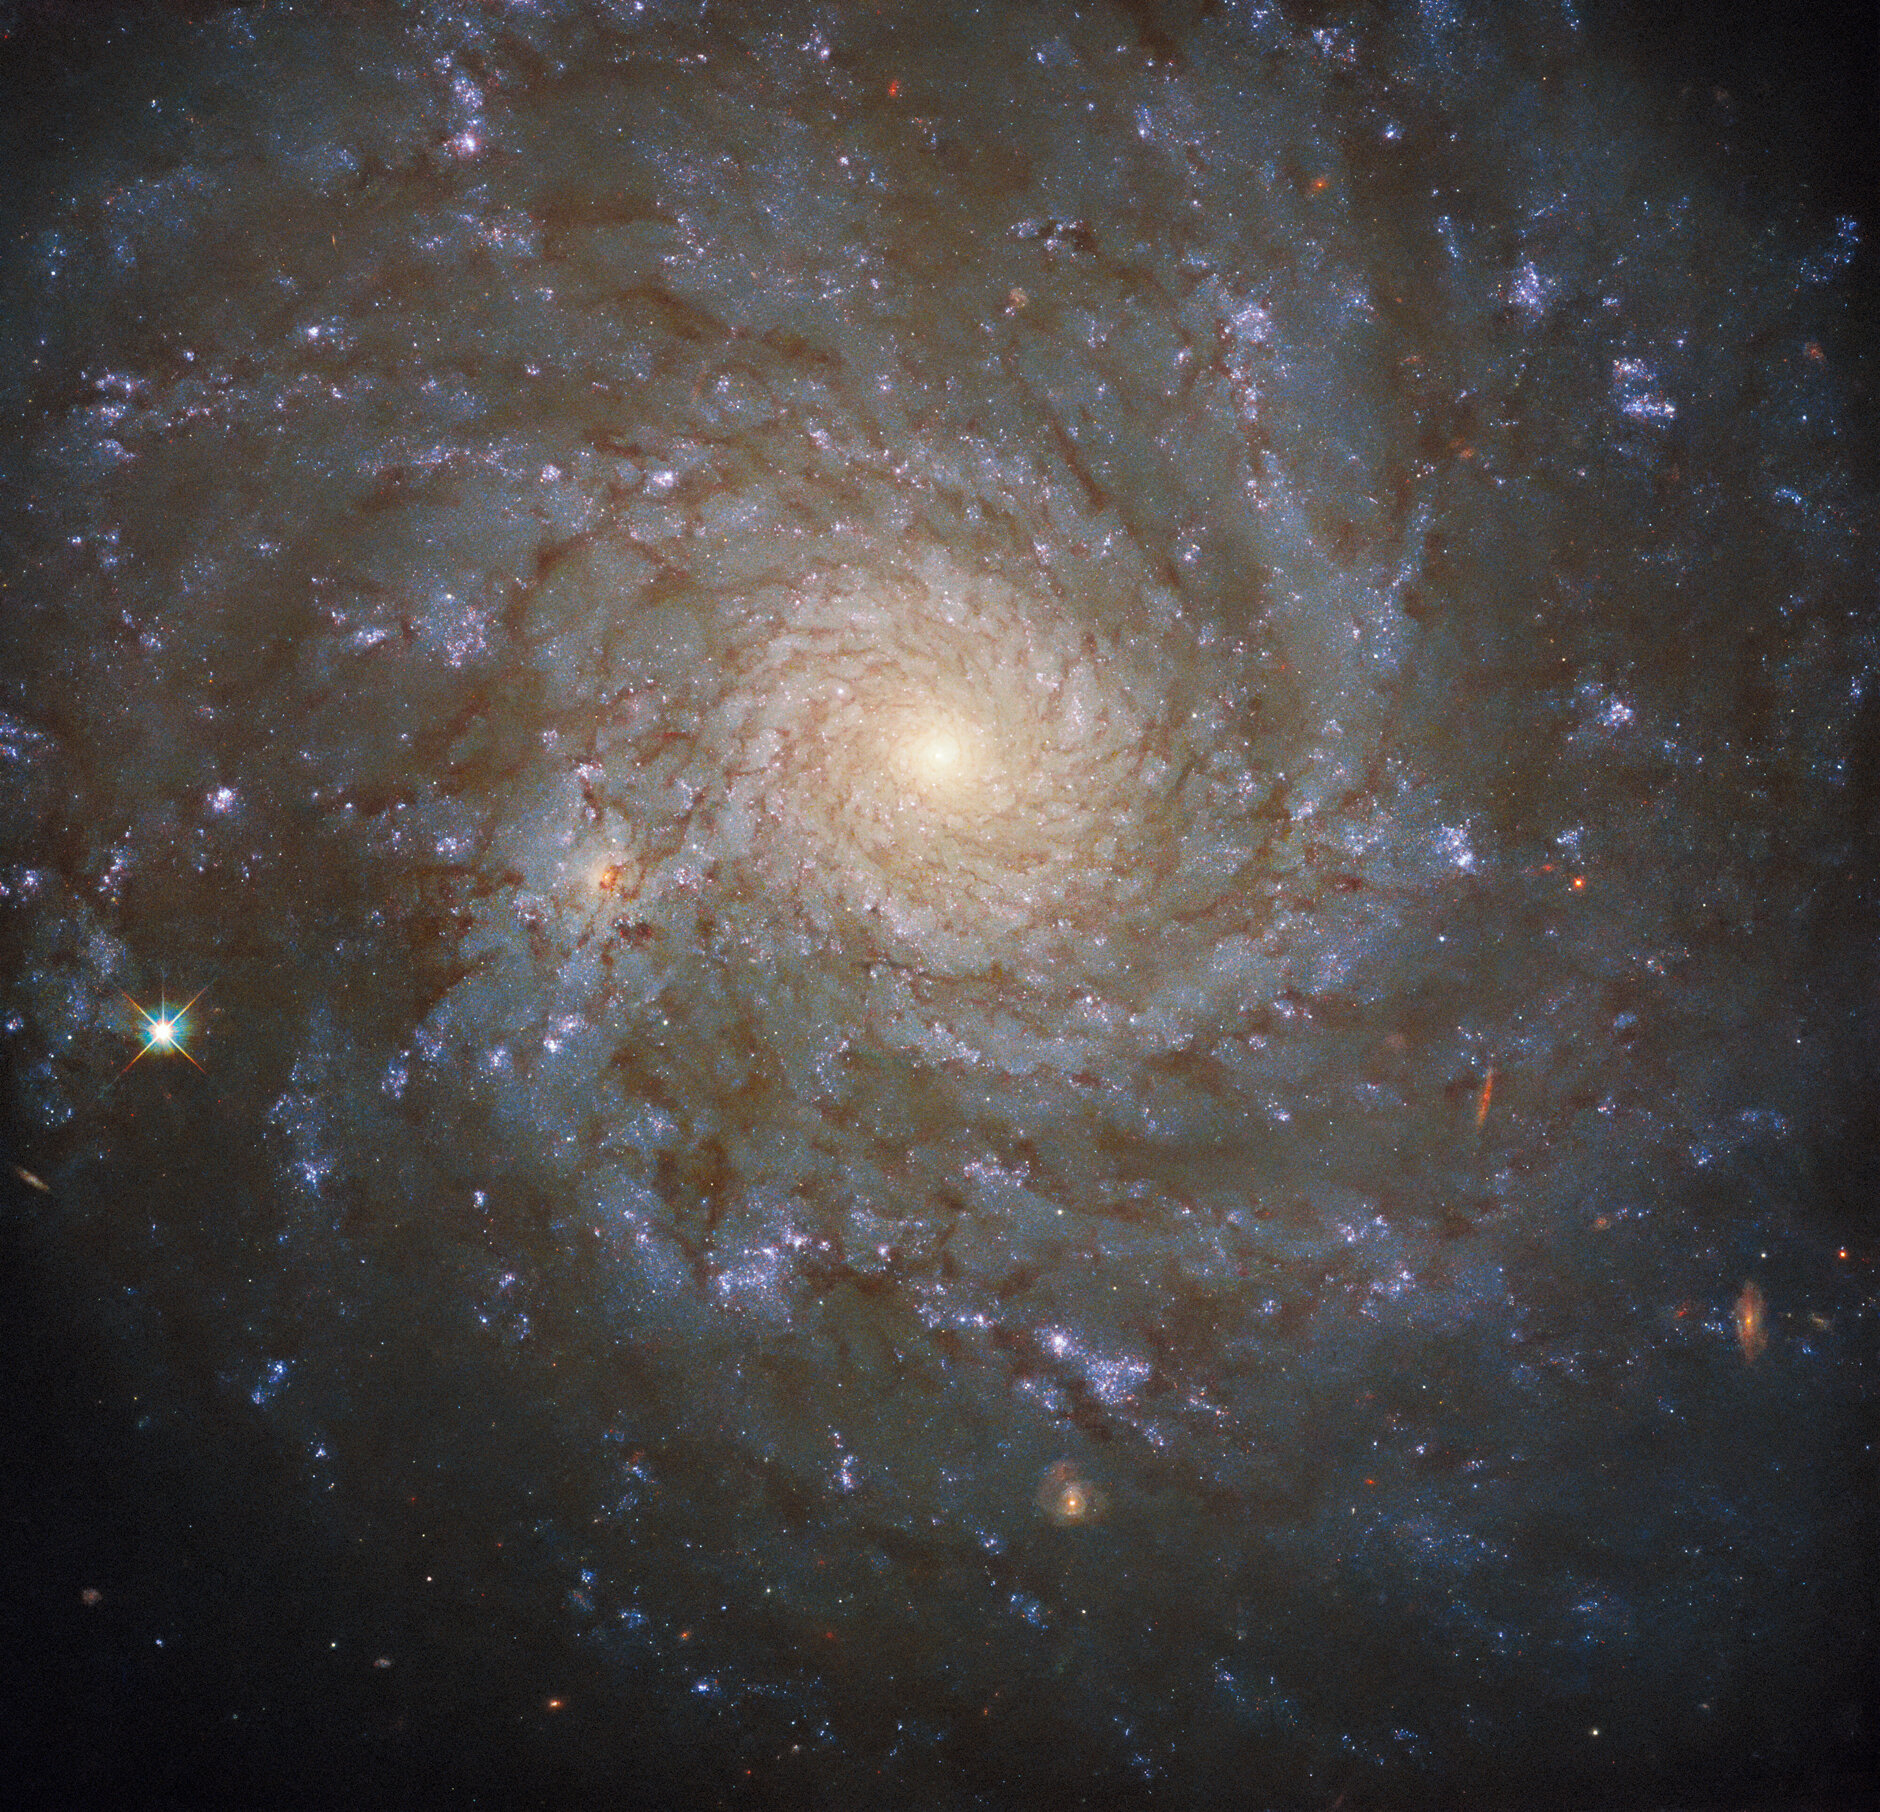 #Hubble spies a stunning spiral